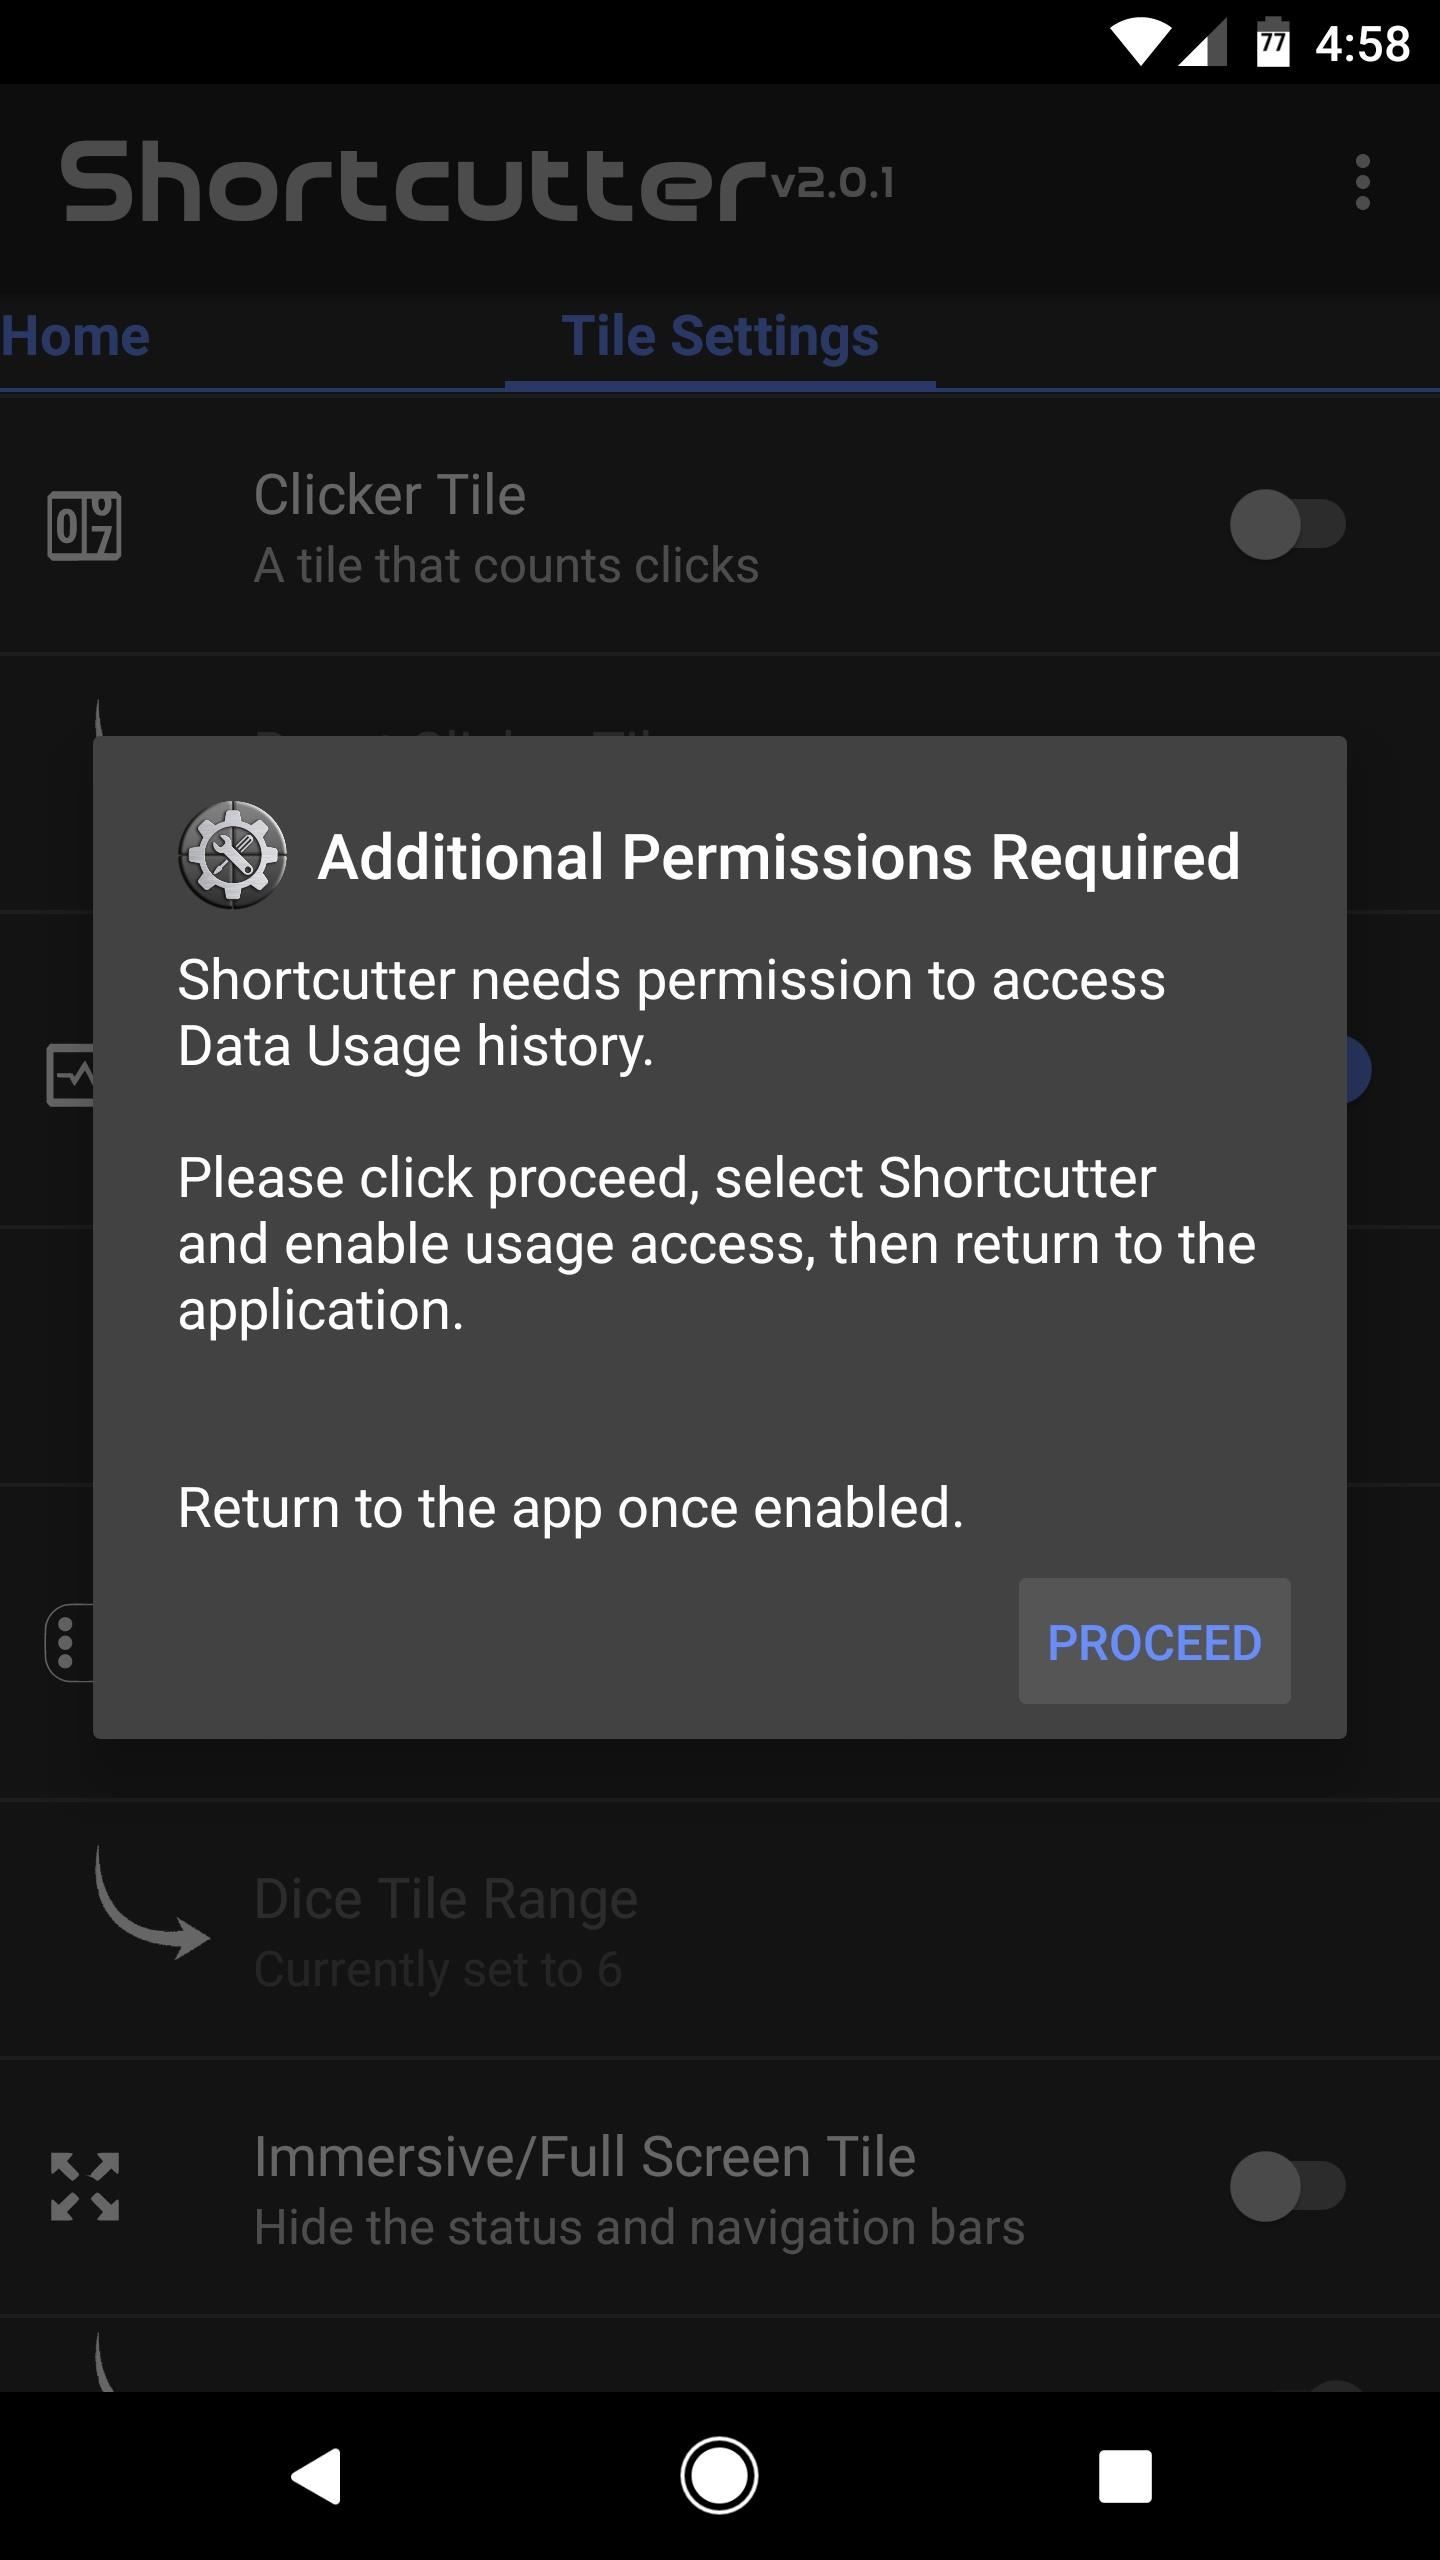 Quickly View RAM, Data Usage & More in Your Android's Quick Settings Menu